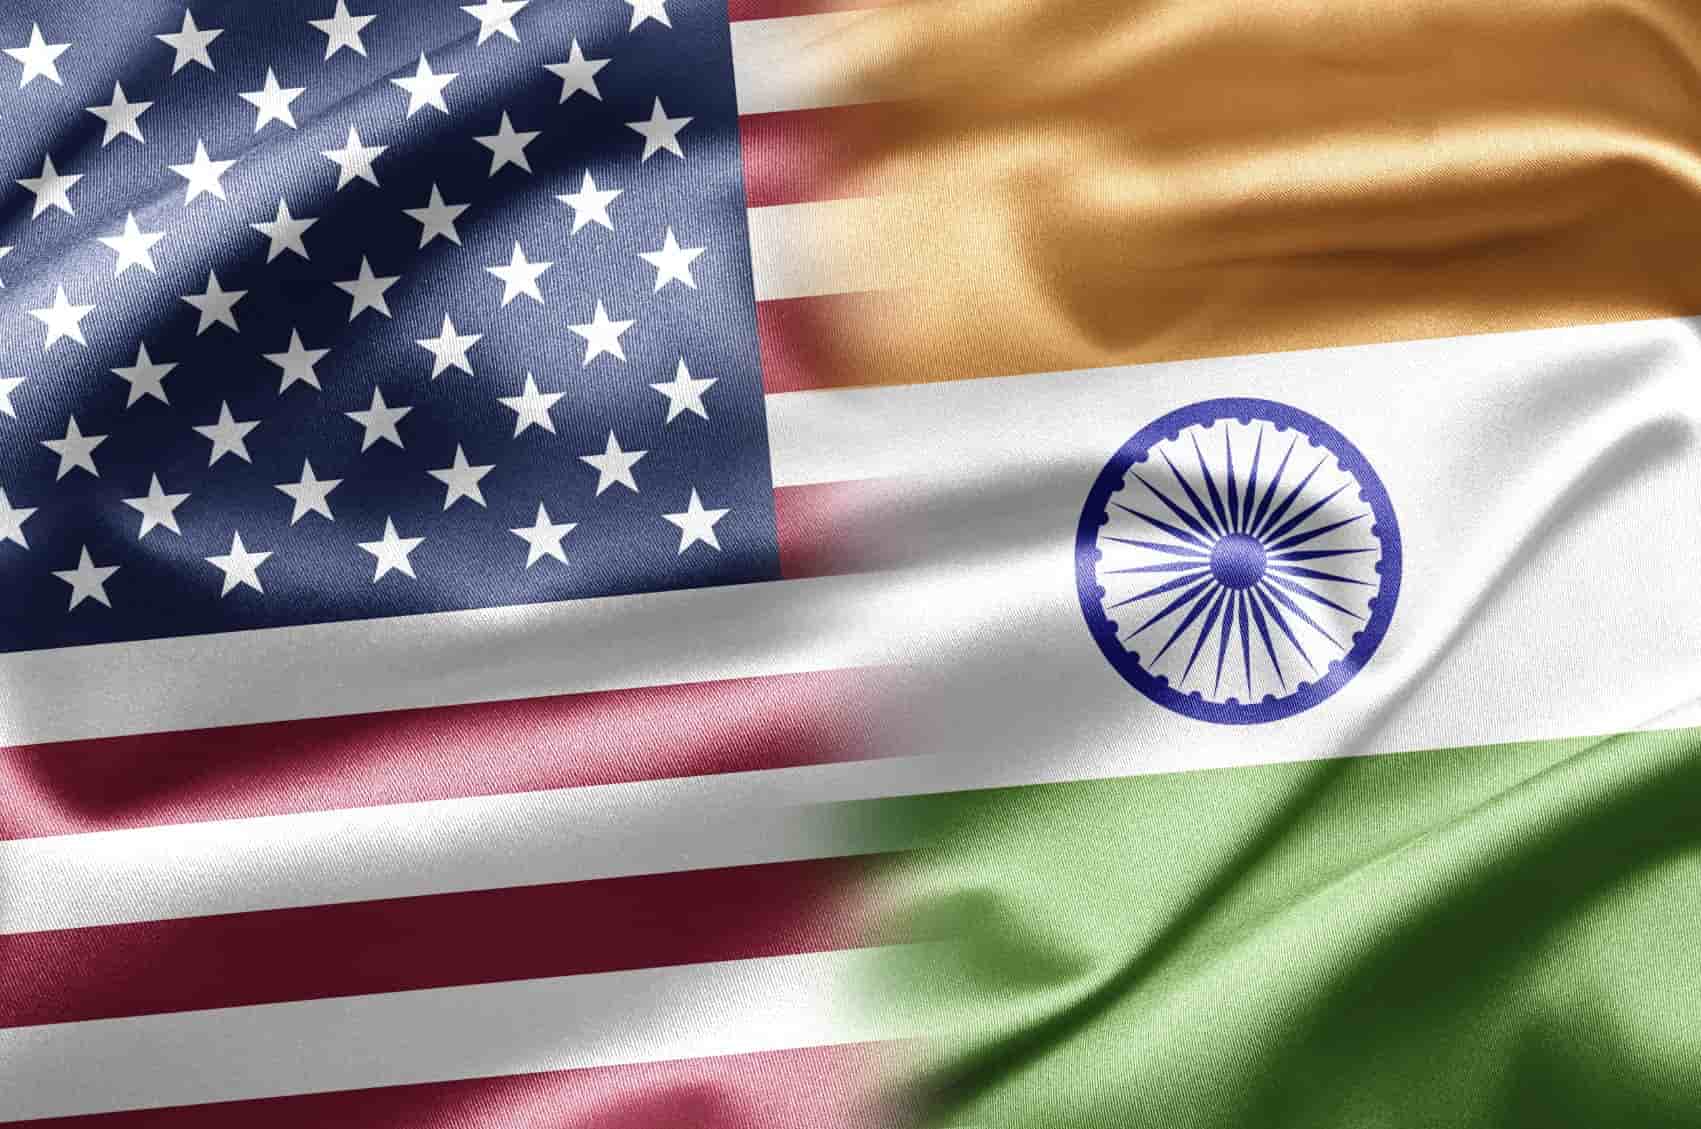 US in consideration to withdraw tariff waiver to India